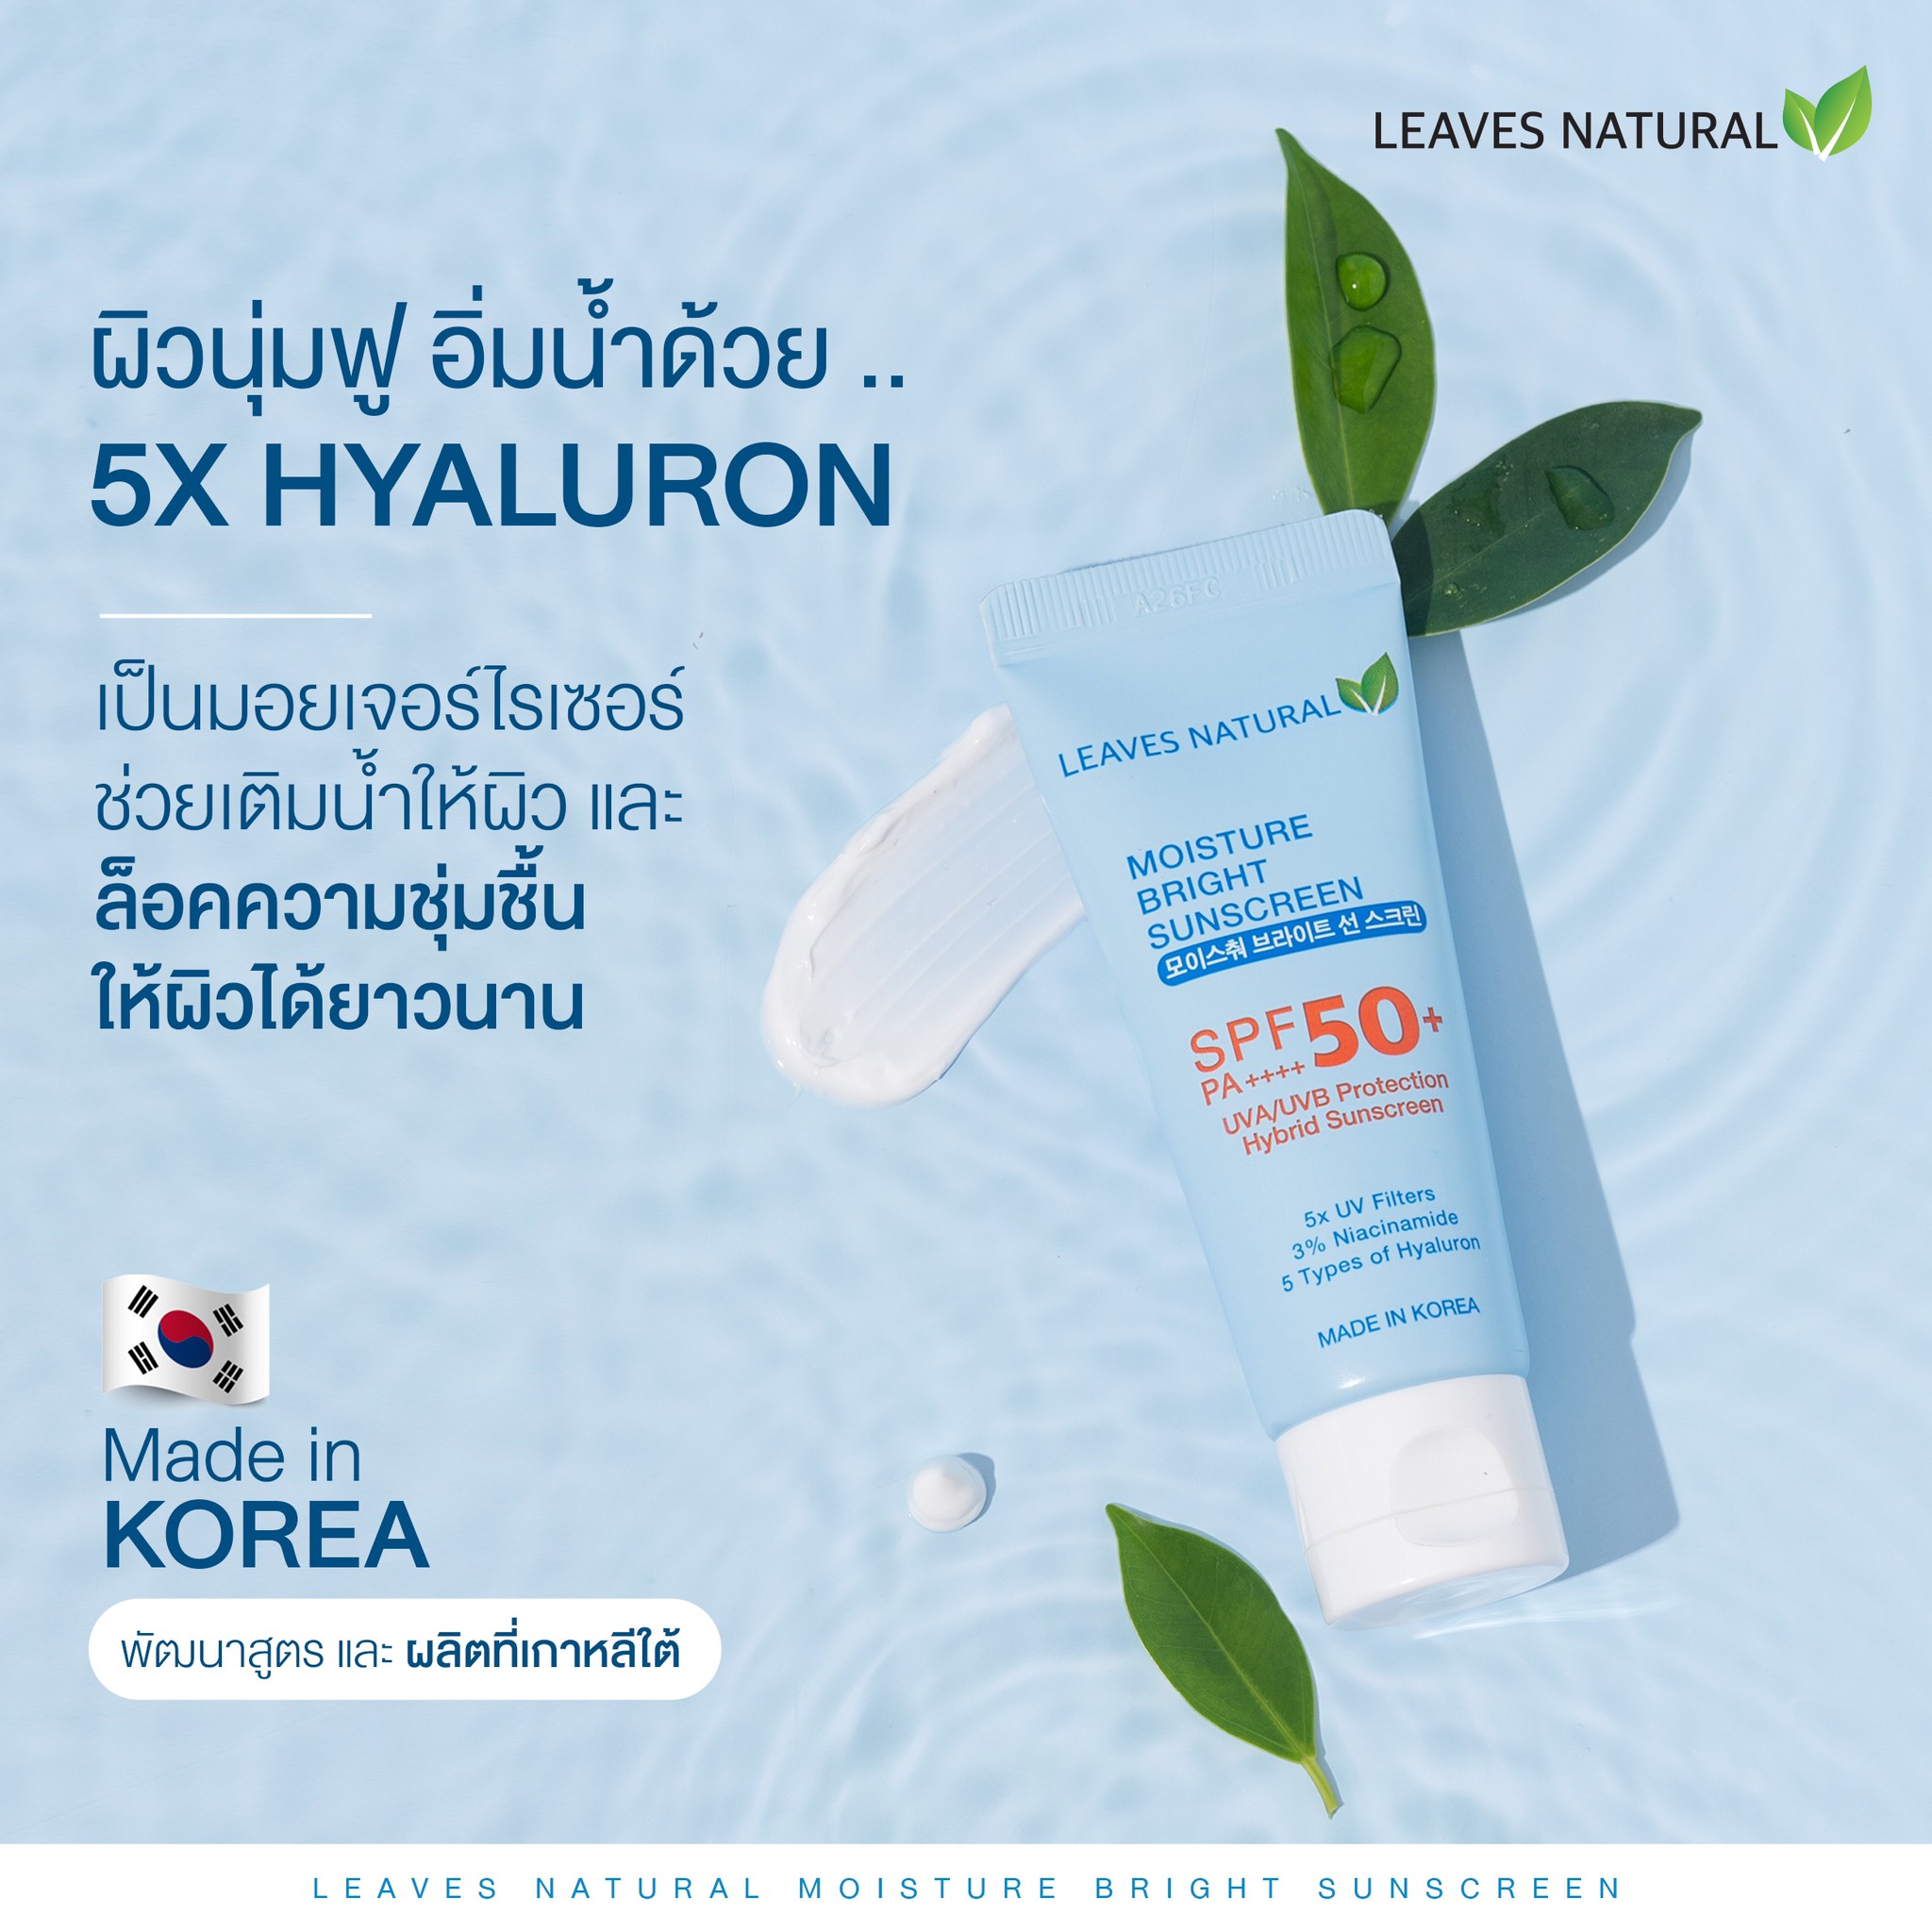 Leaves Natural Moisture Bright Sunscreen SPF50+ PA++++